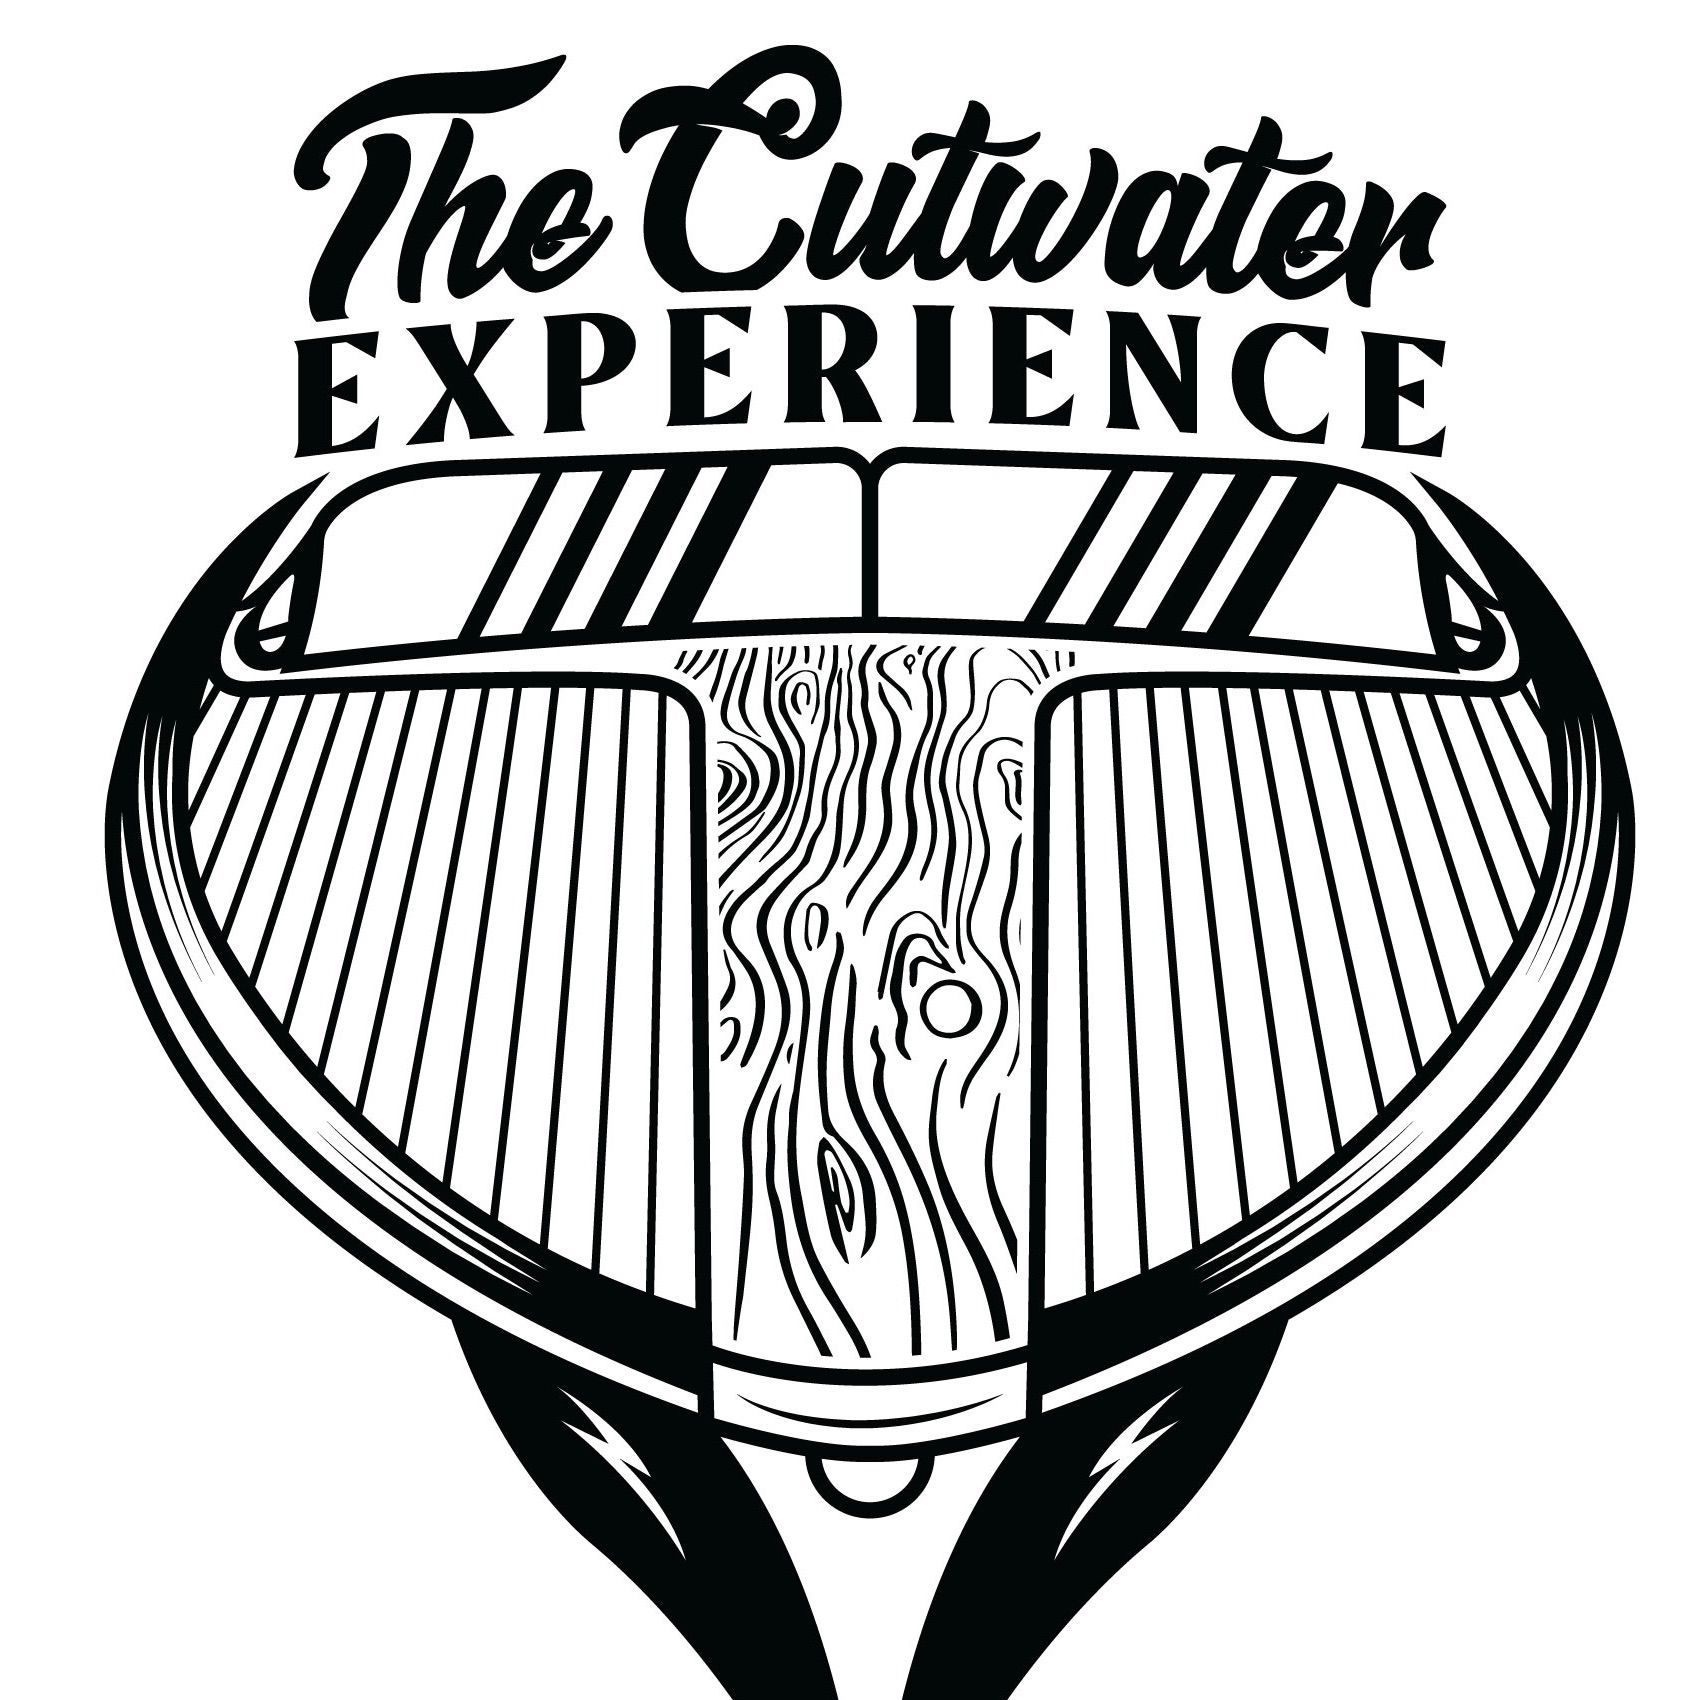 The cutwater experience, 1206 Front St, Sacramento, 95814